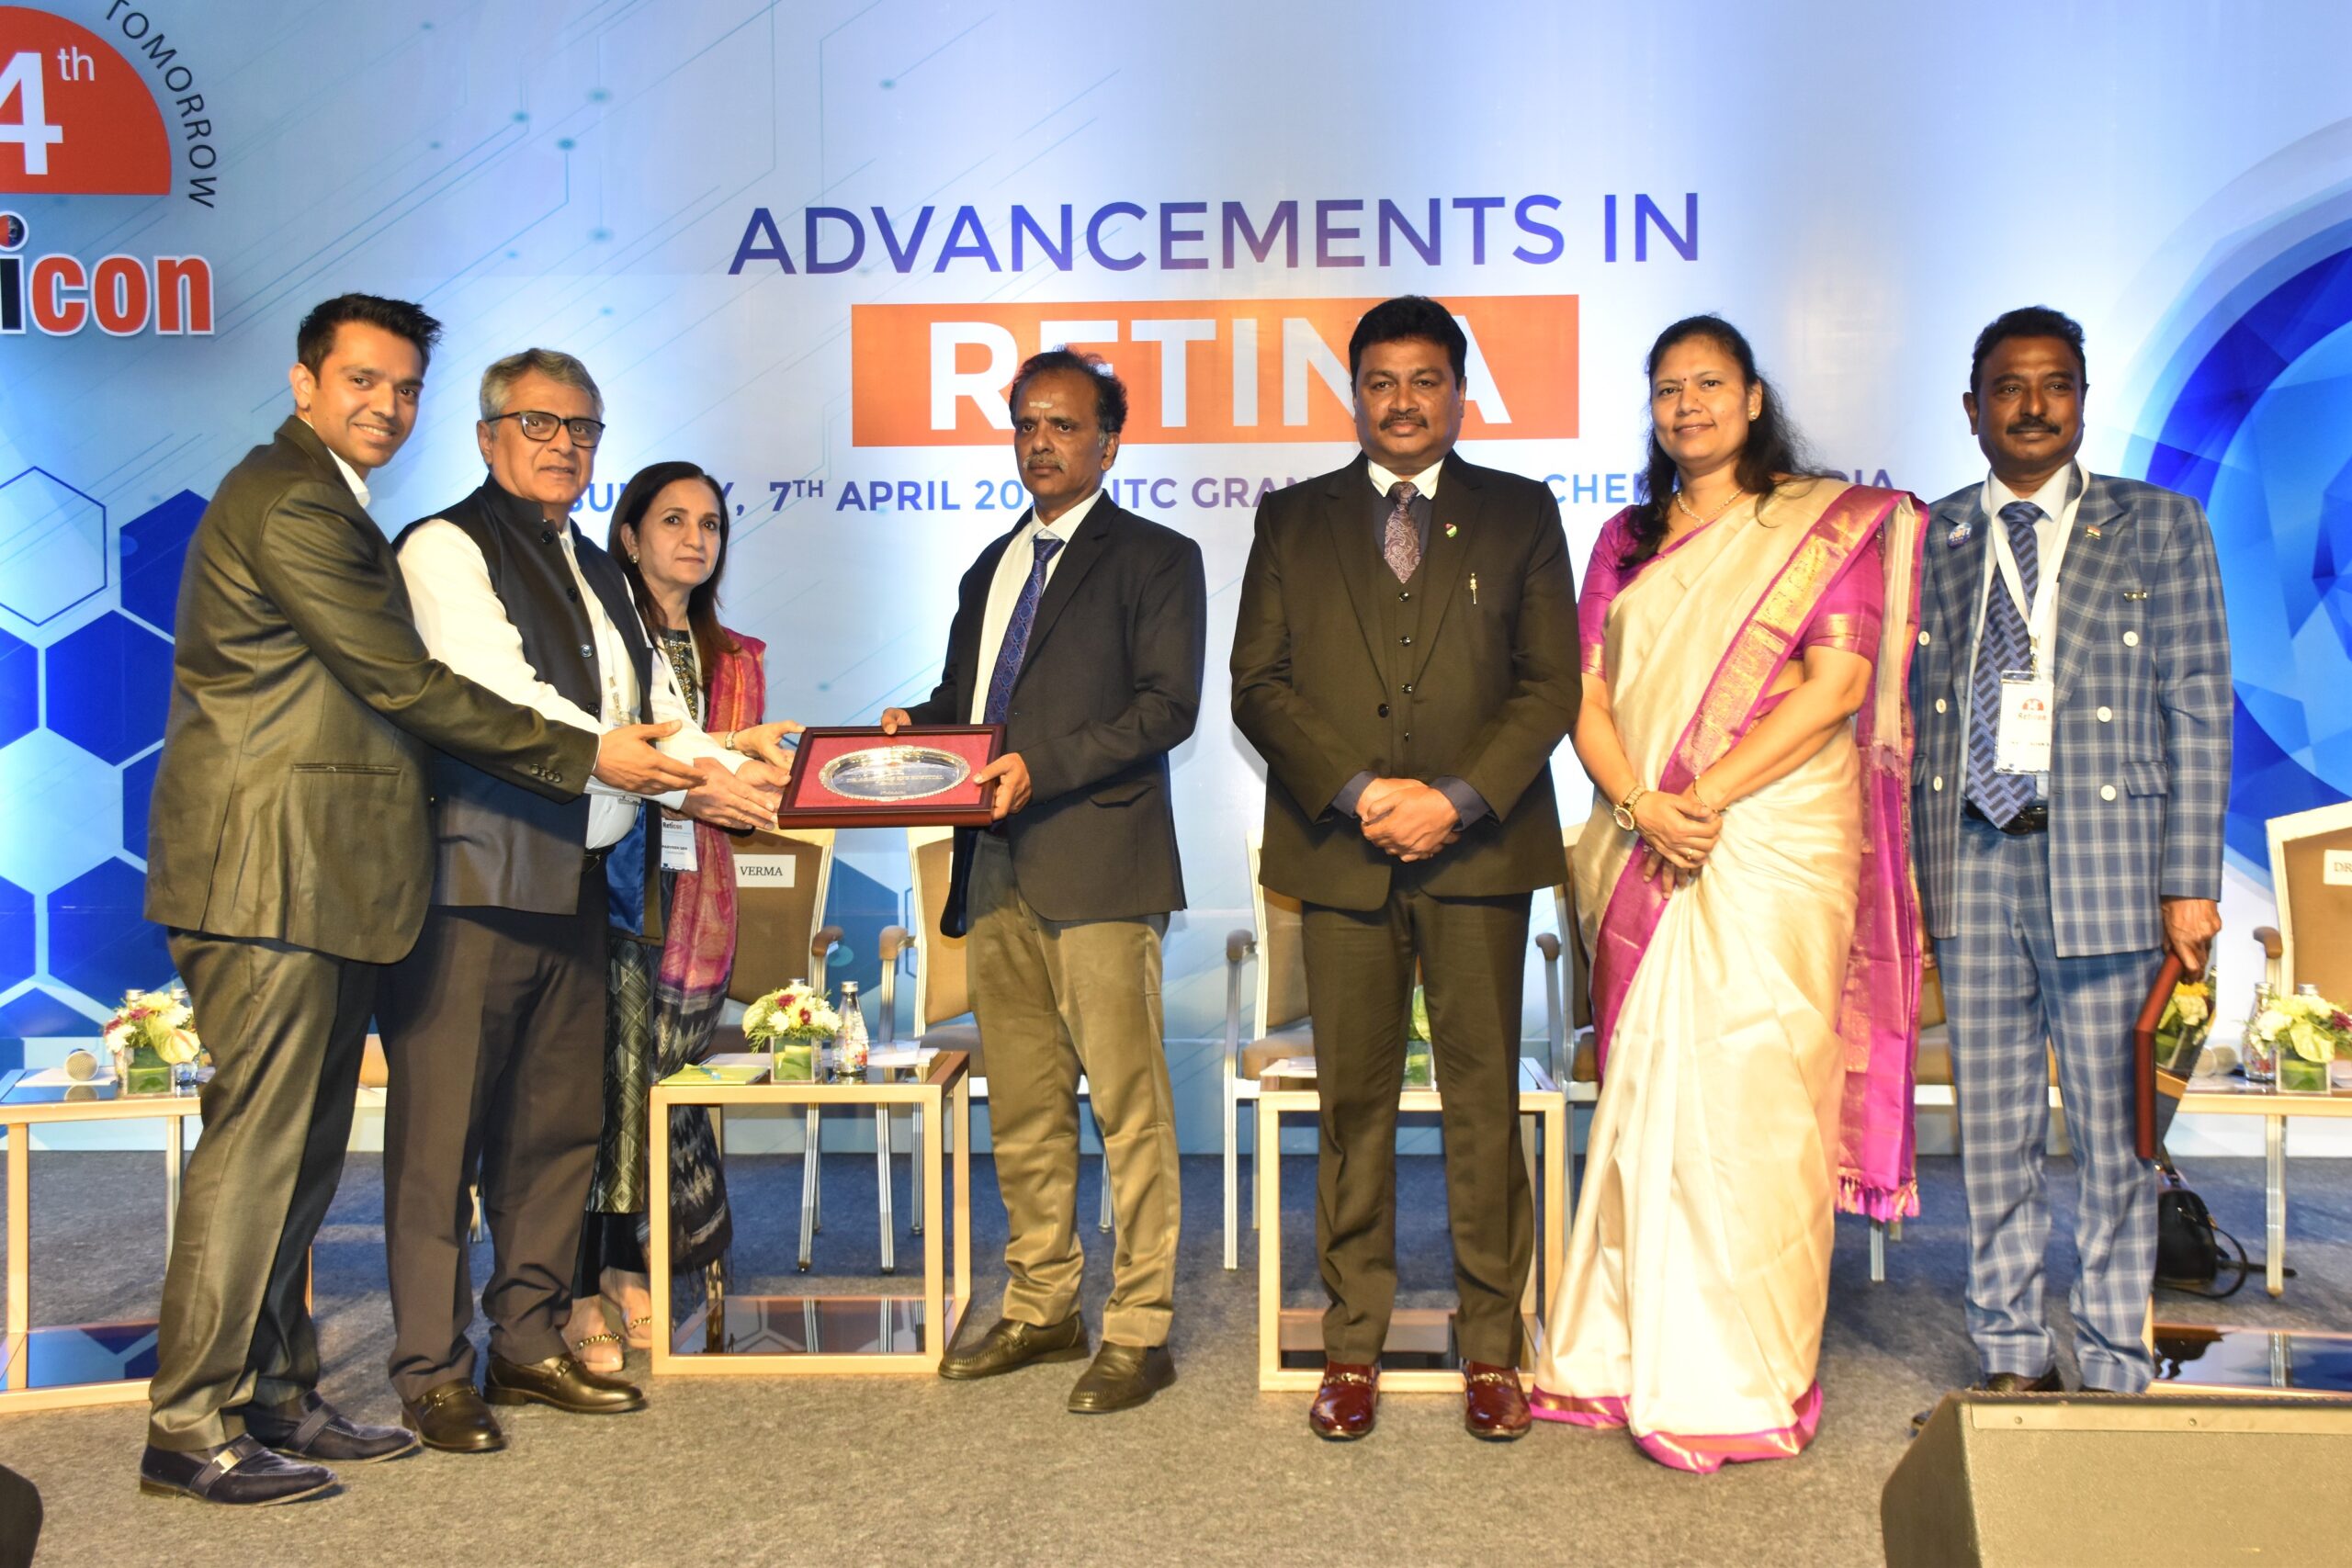 One of India’s Biggest Retinal Conference Reticon 2024 attracts around 1500 Ophthalmologists